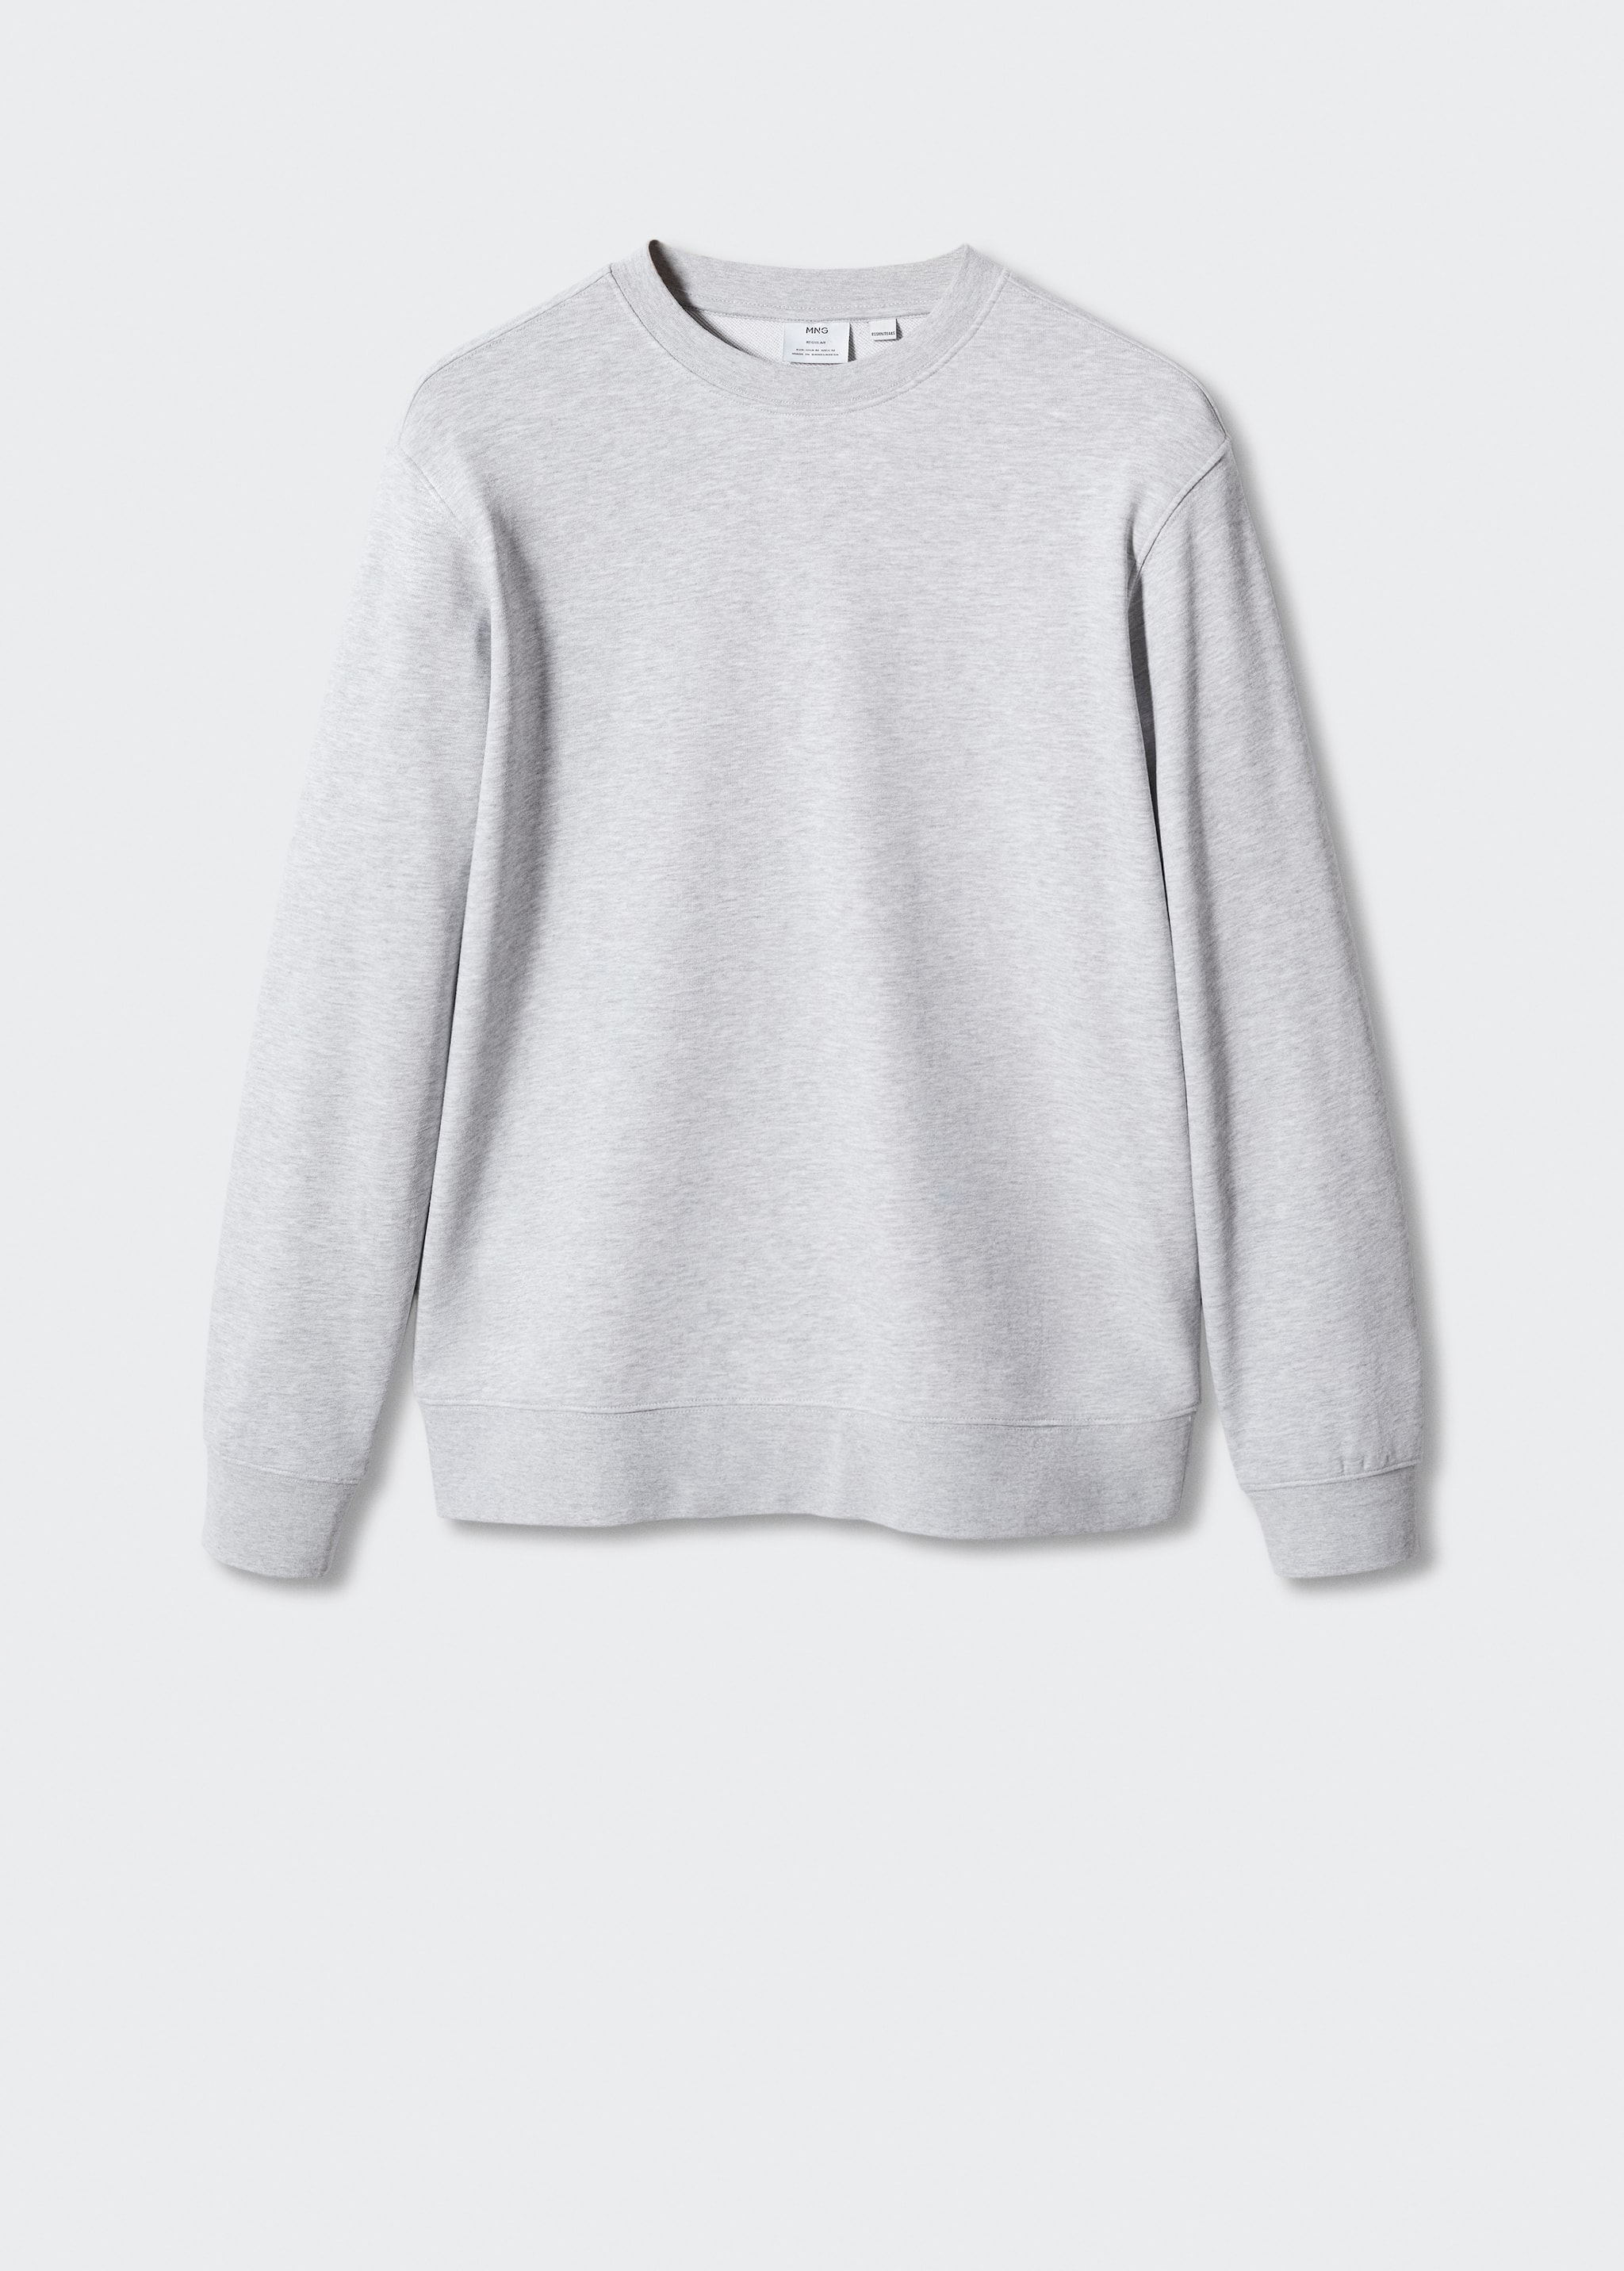 Lightweight cotton sweatshirt - Article without model